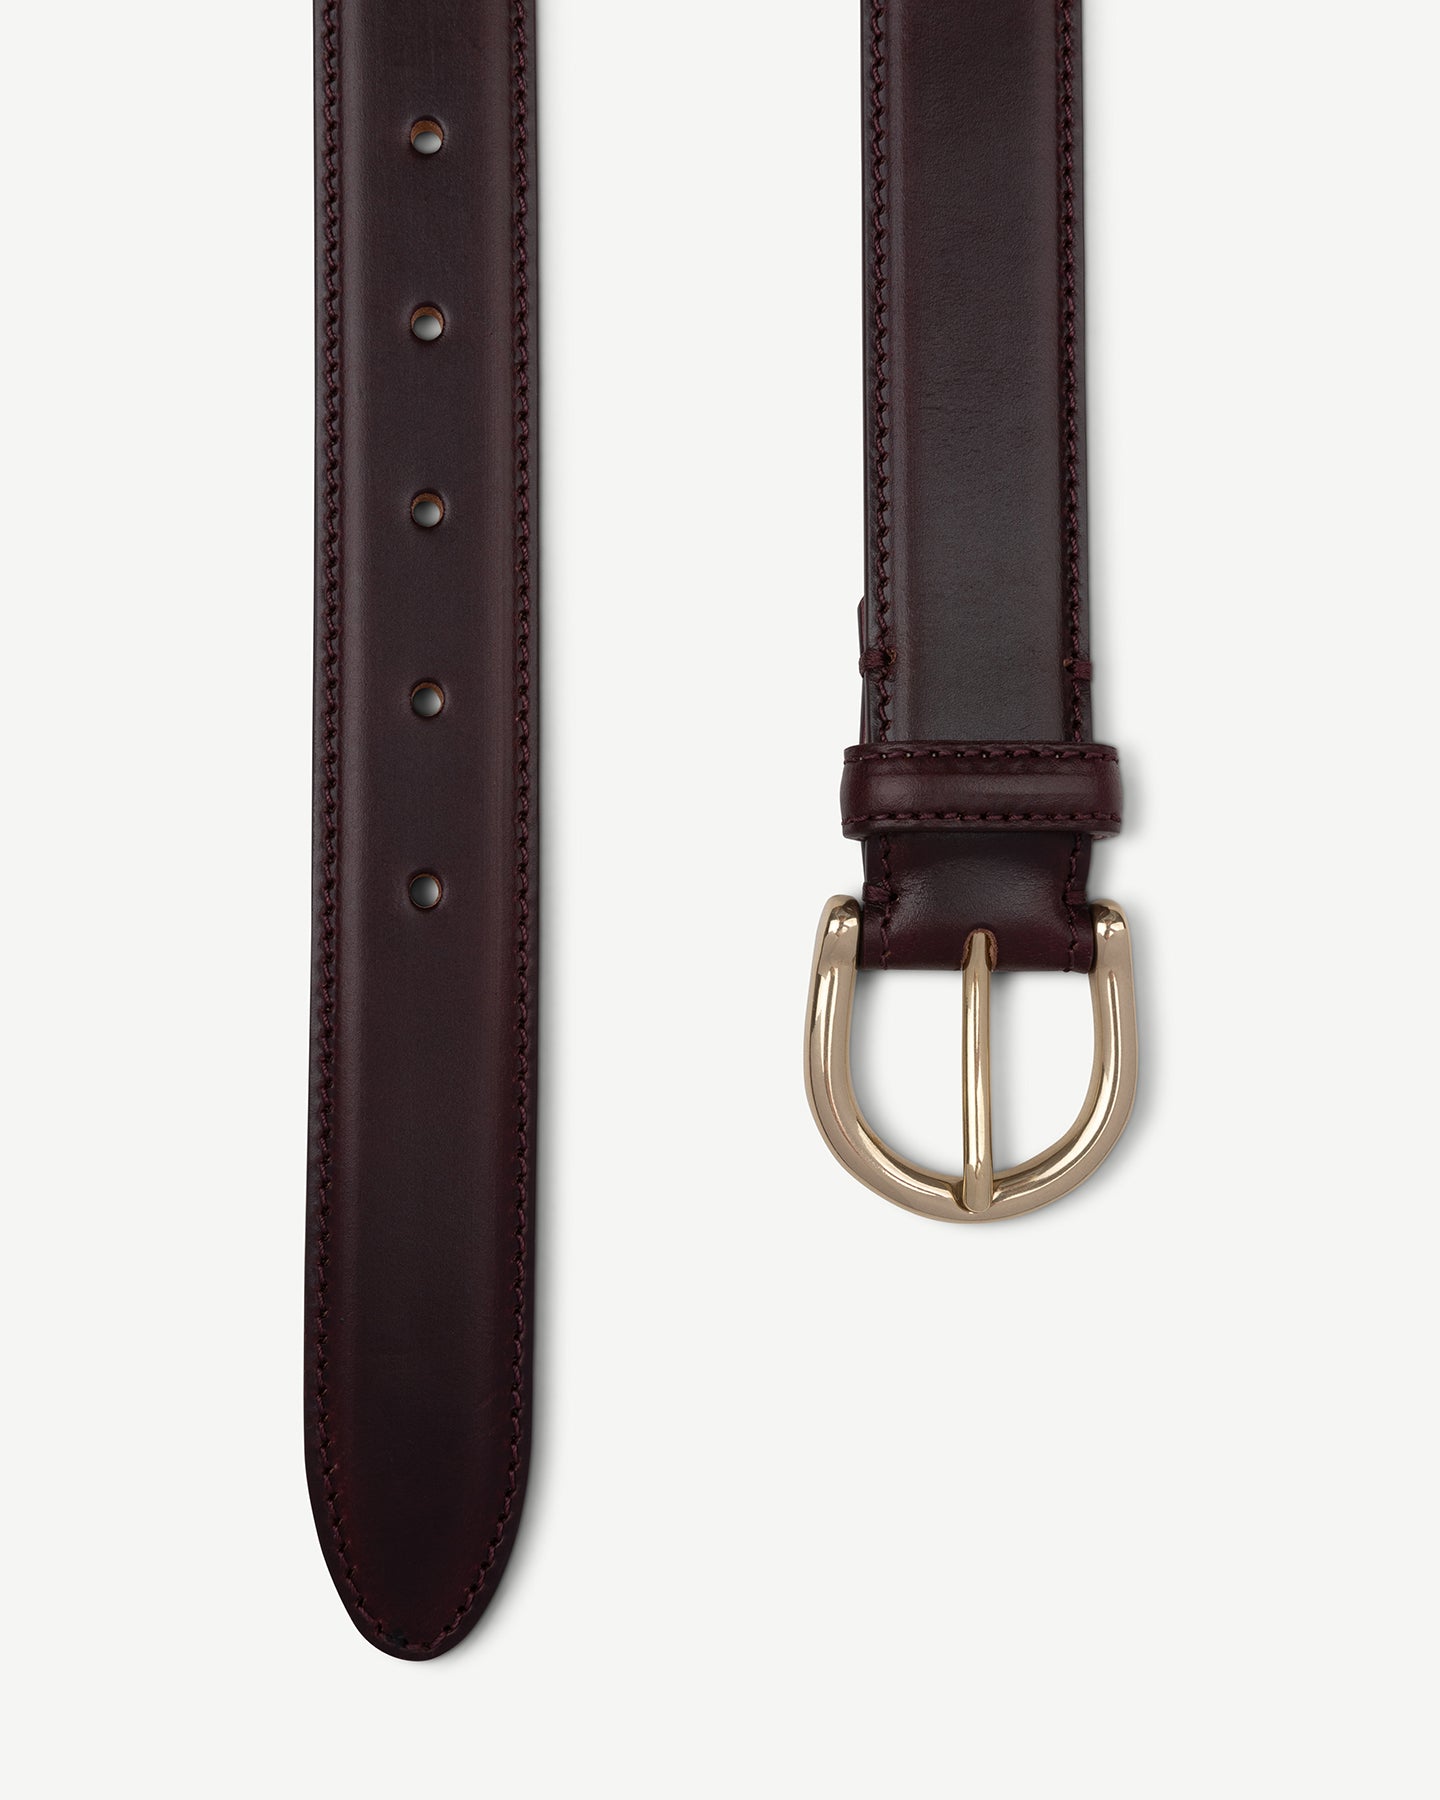 Burgundy leather dress belt with solid brass buckle